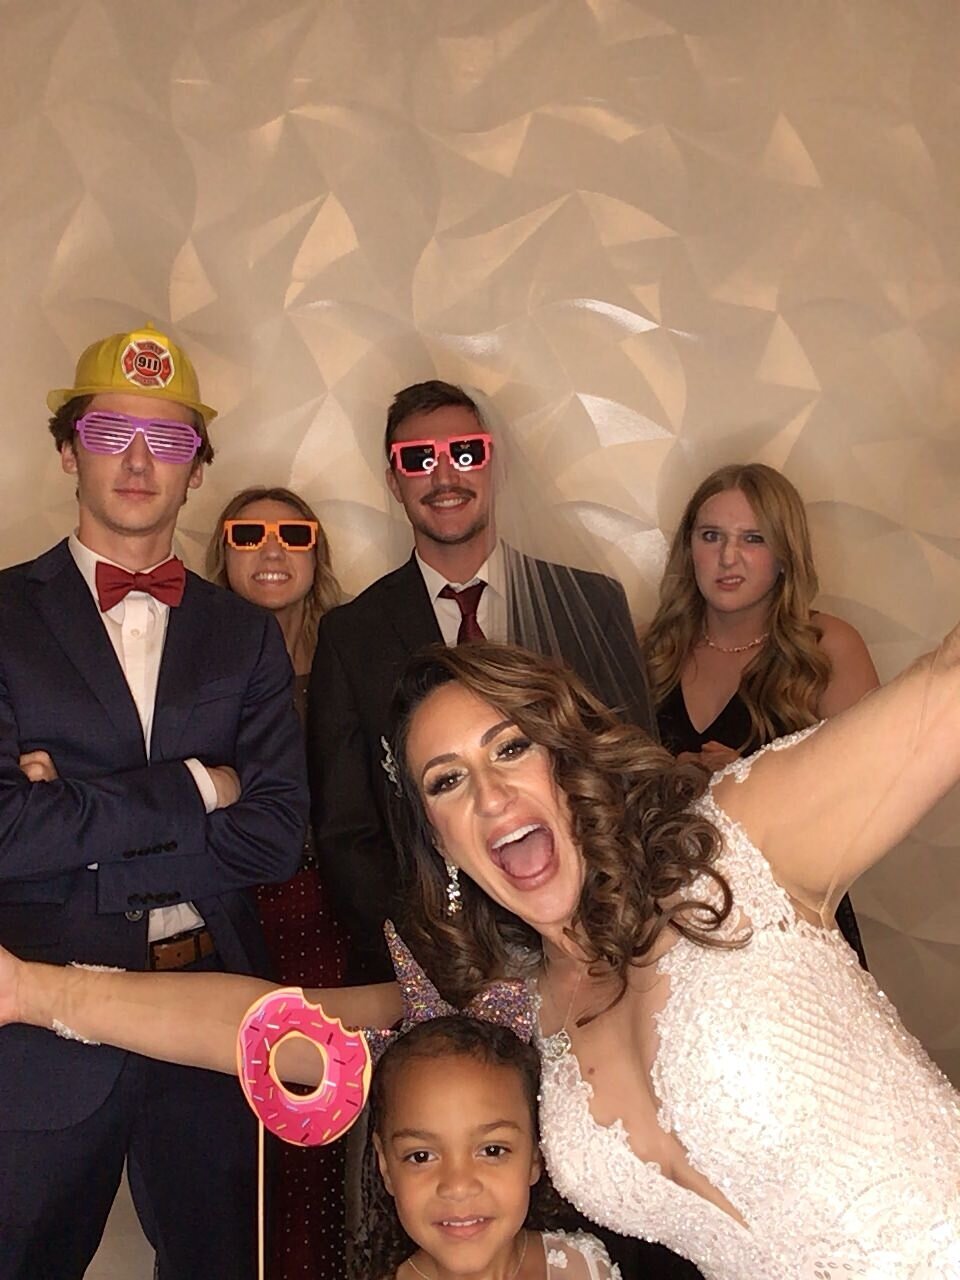 Bride surprises guests by jumping into photobooth with them